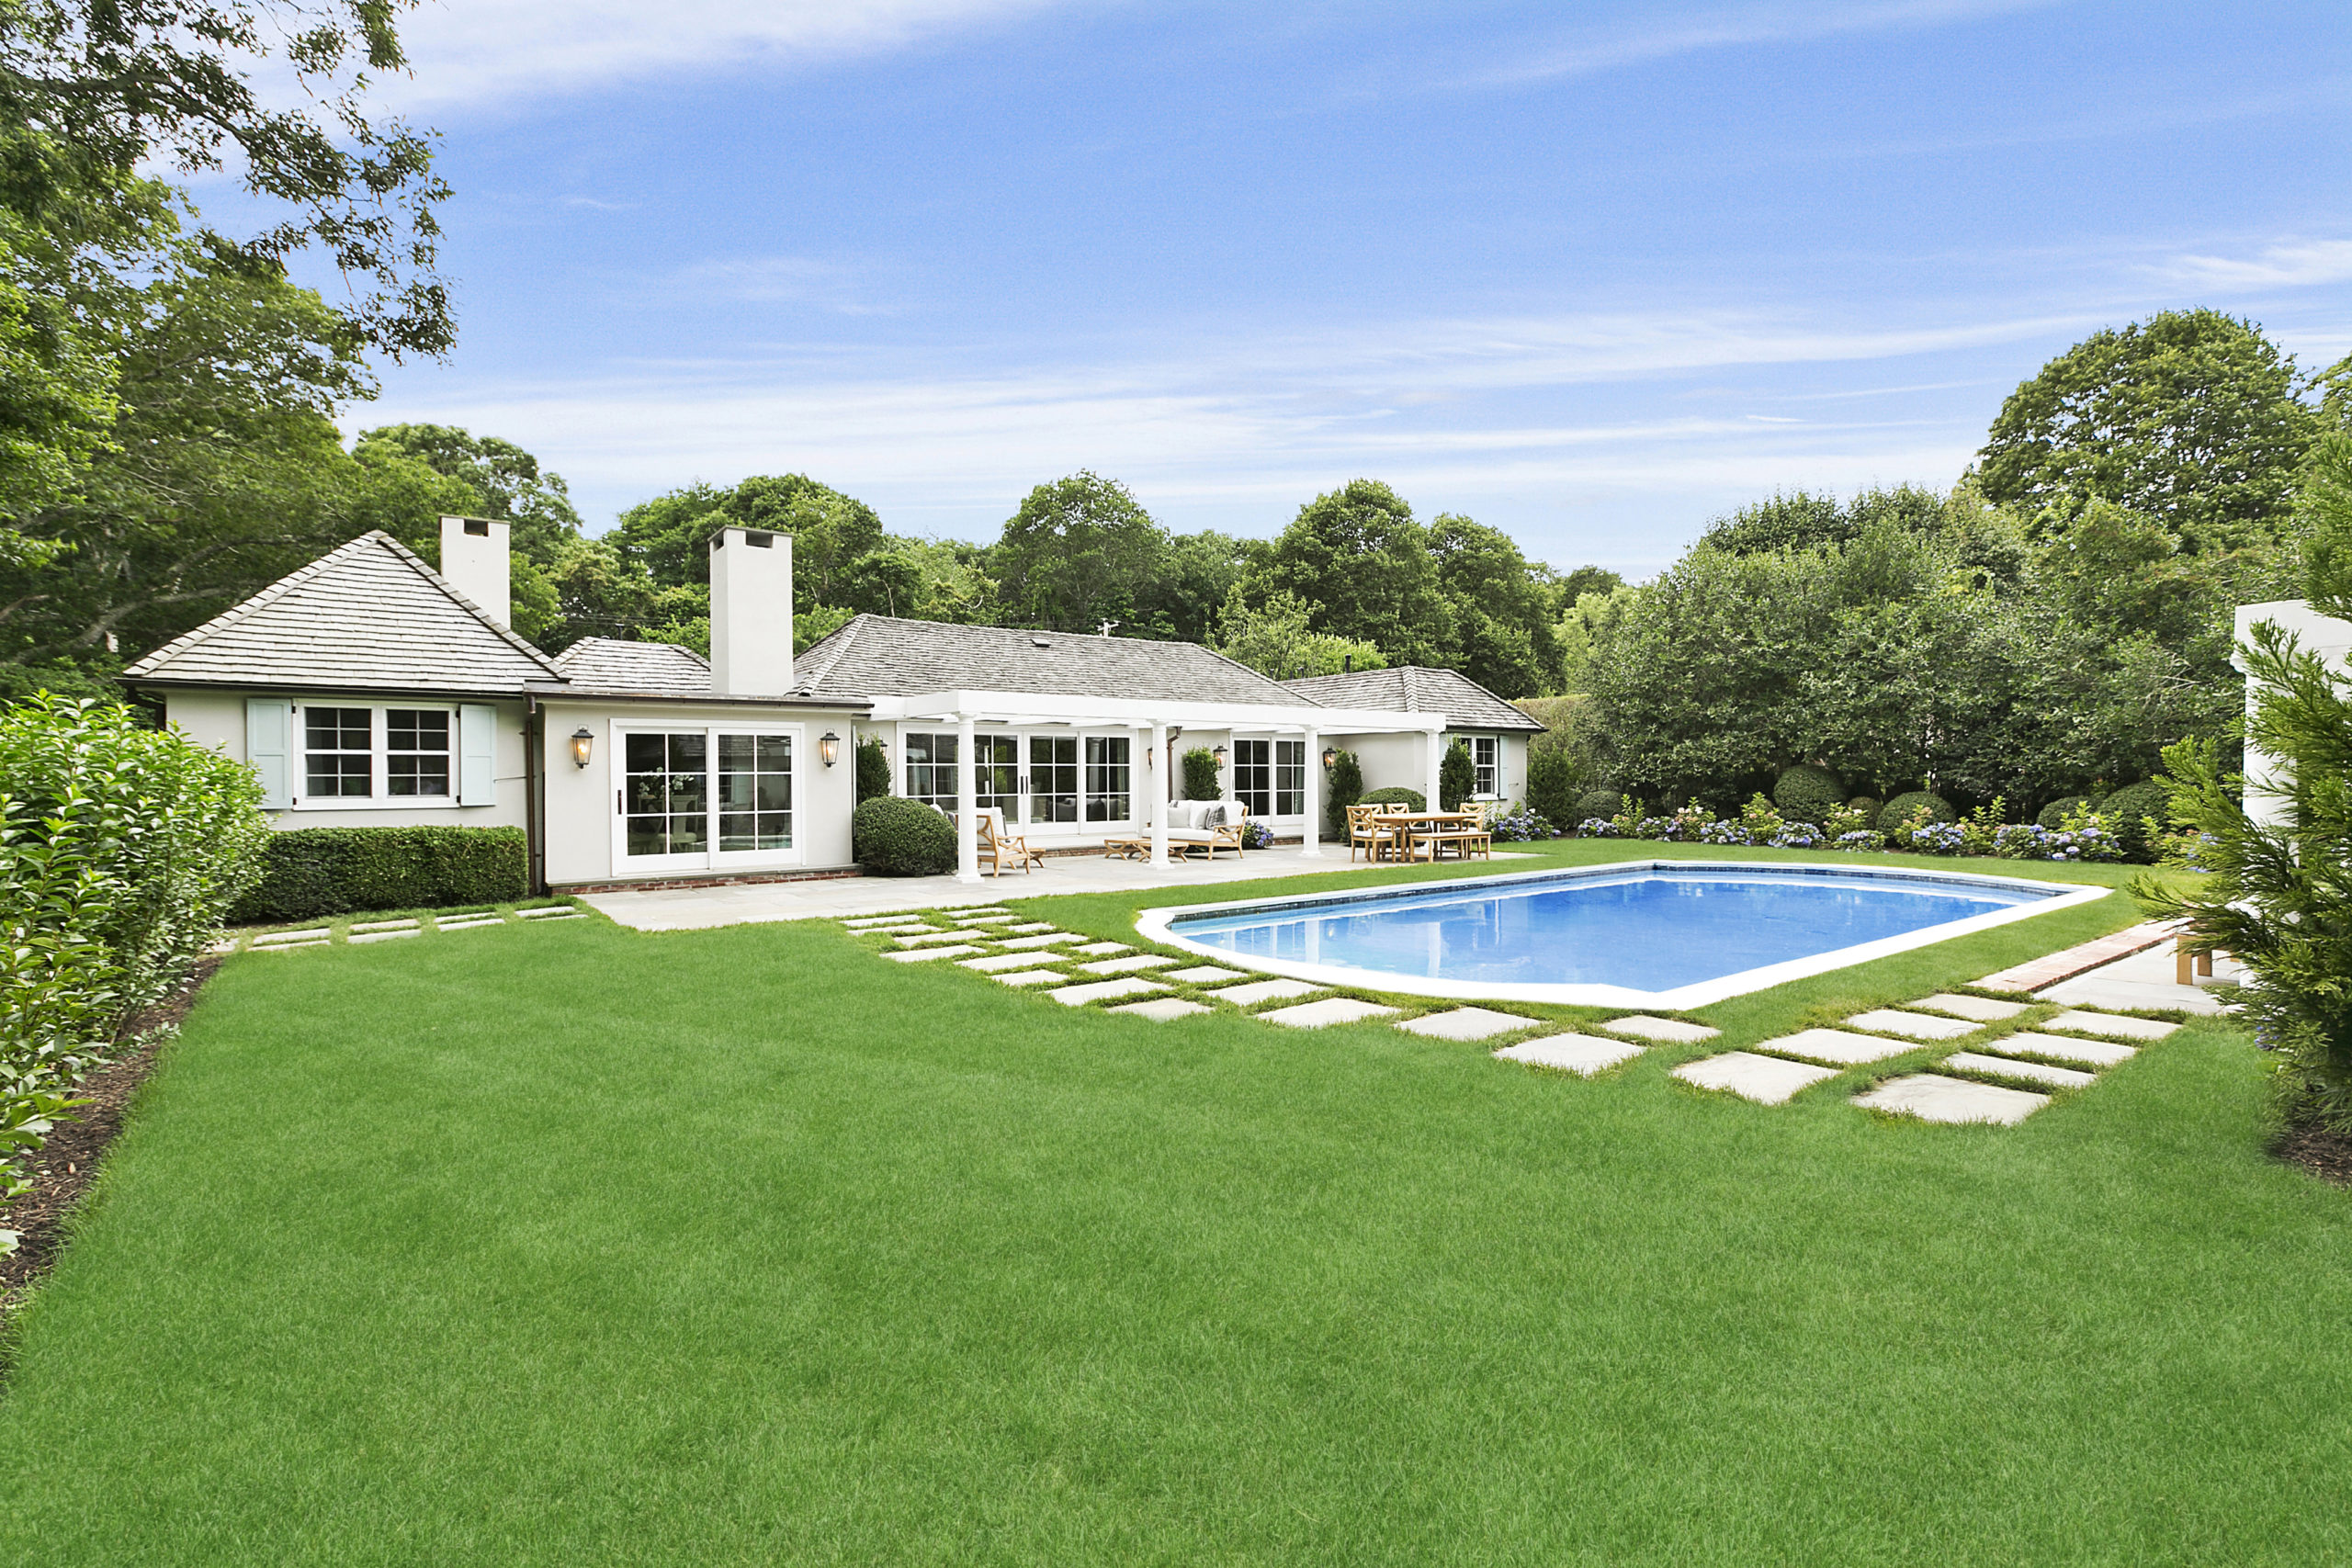 Racheal Ray sold her Tuckahoe Lane home in Southampton for $3.25 million.